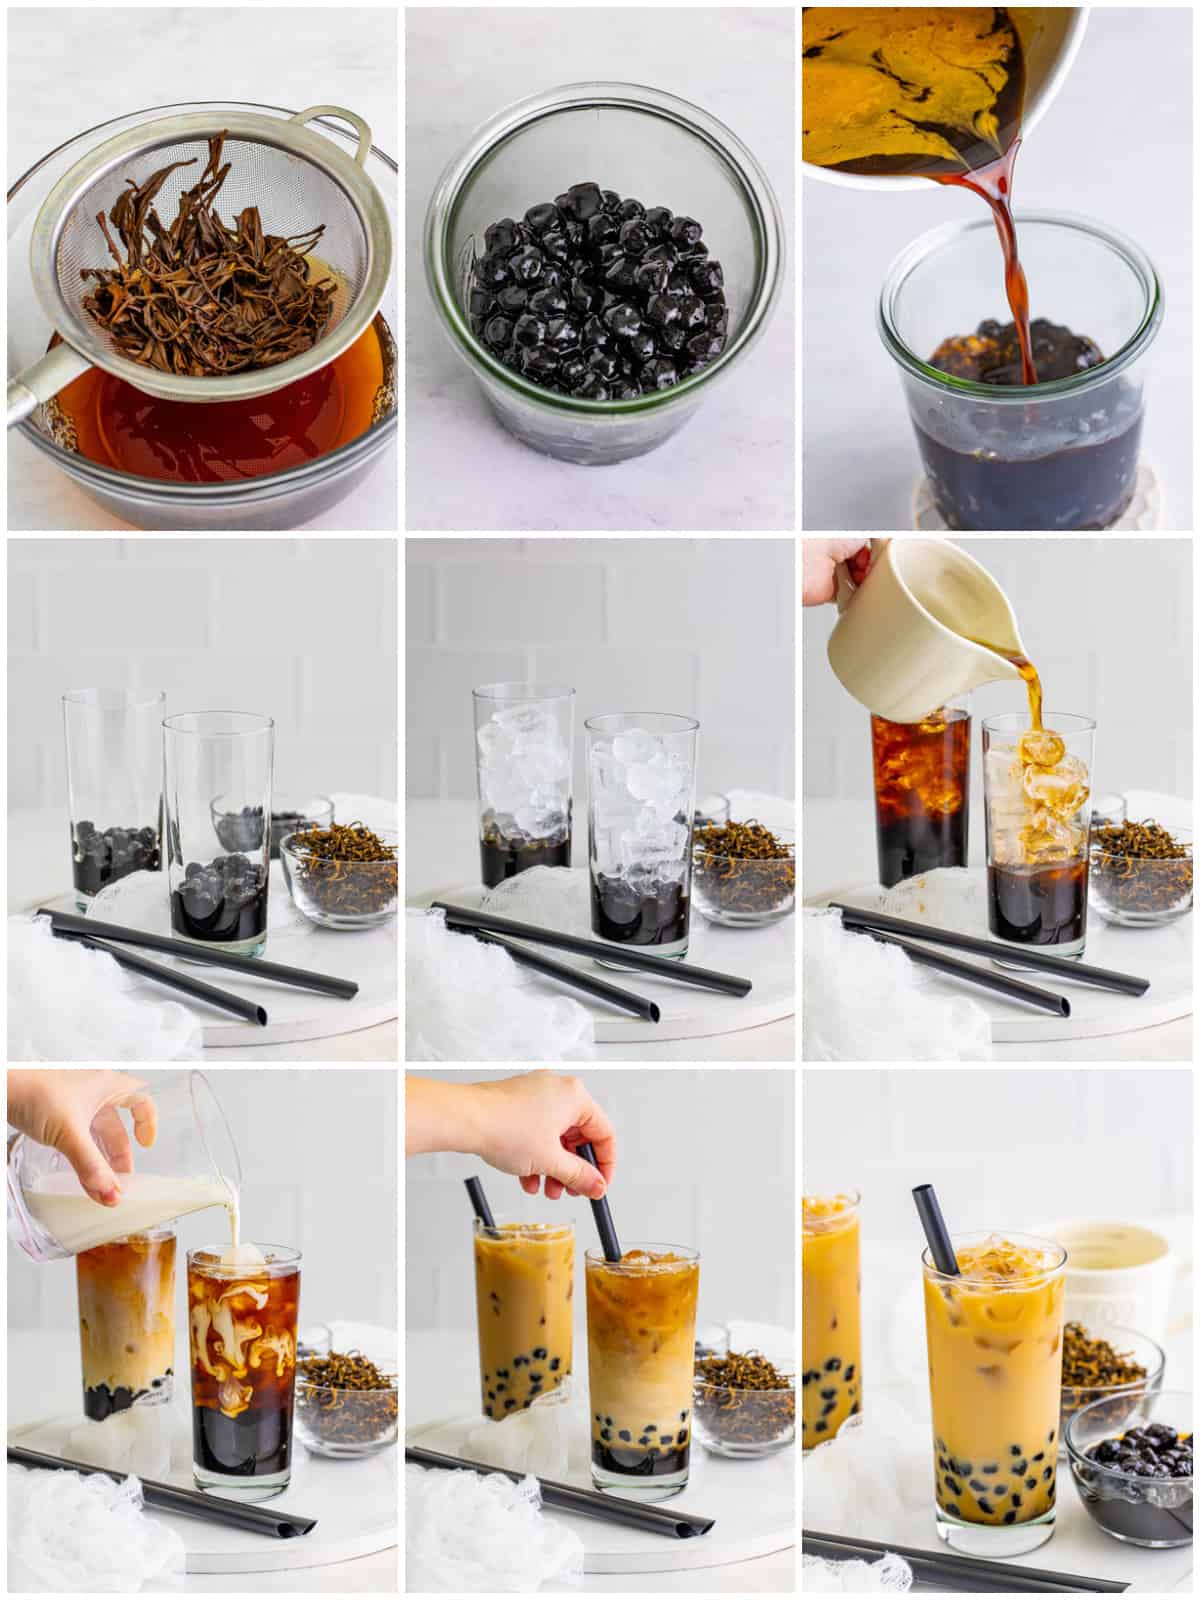 Step by step on how to make a Bubble Tea Recipe.